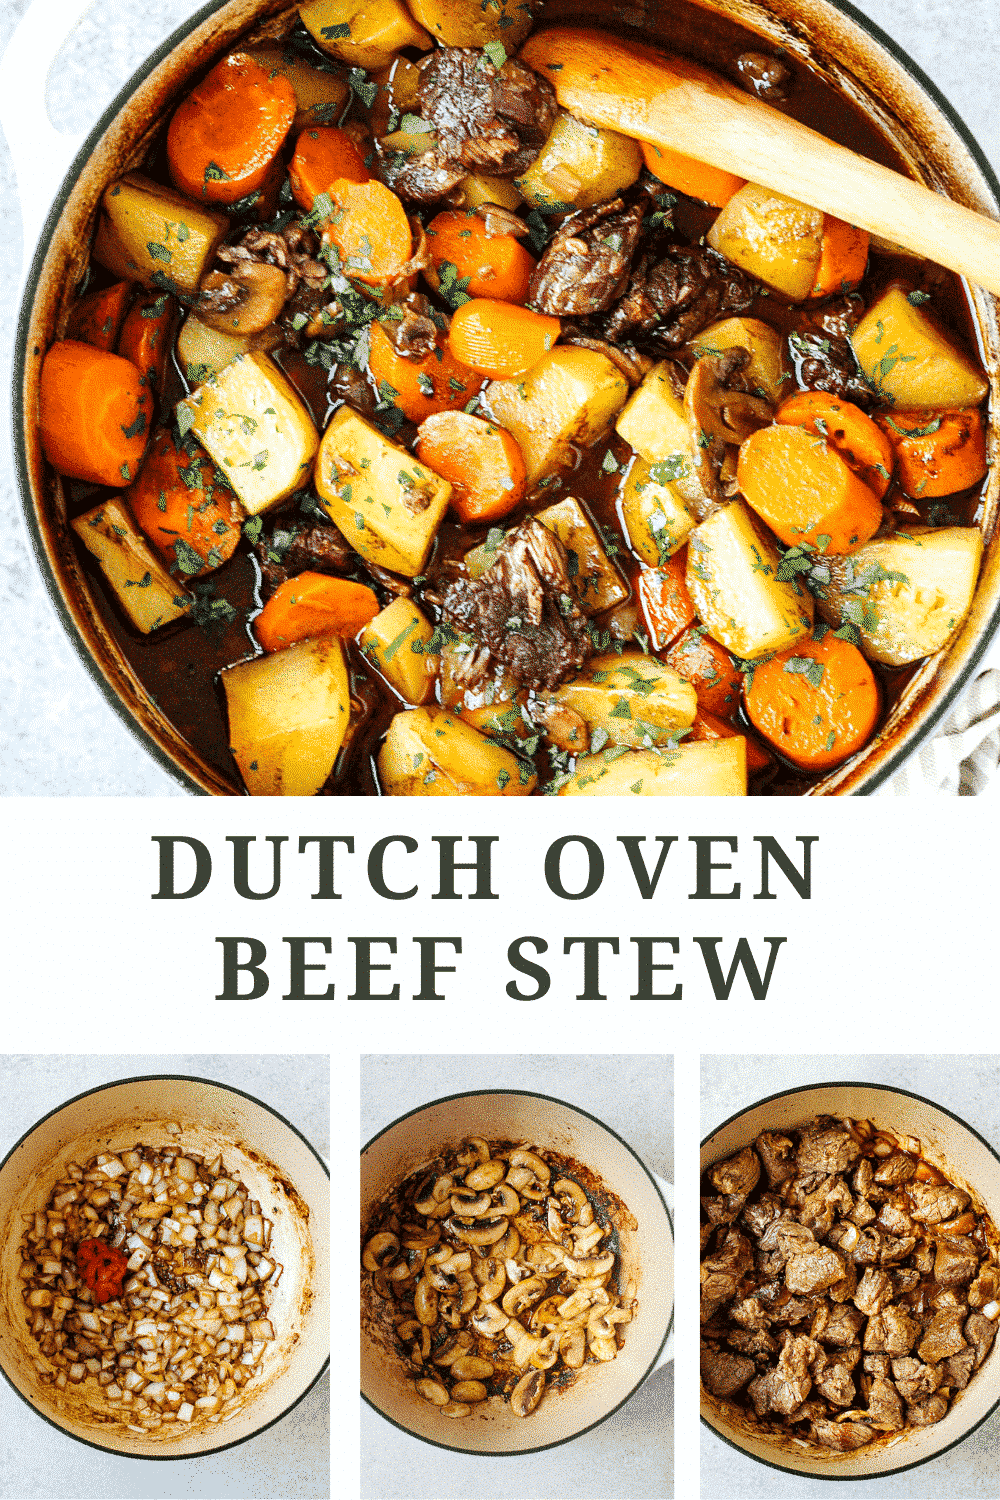 titled photo collage (and shown): Dutch Oven Beef Stew